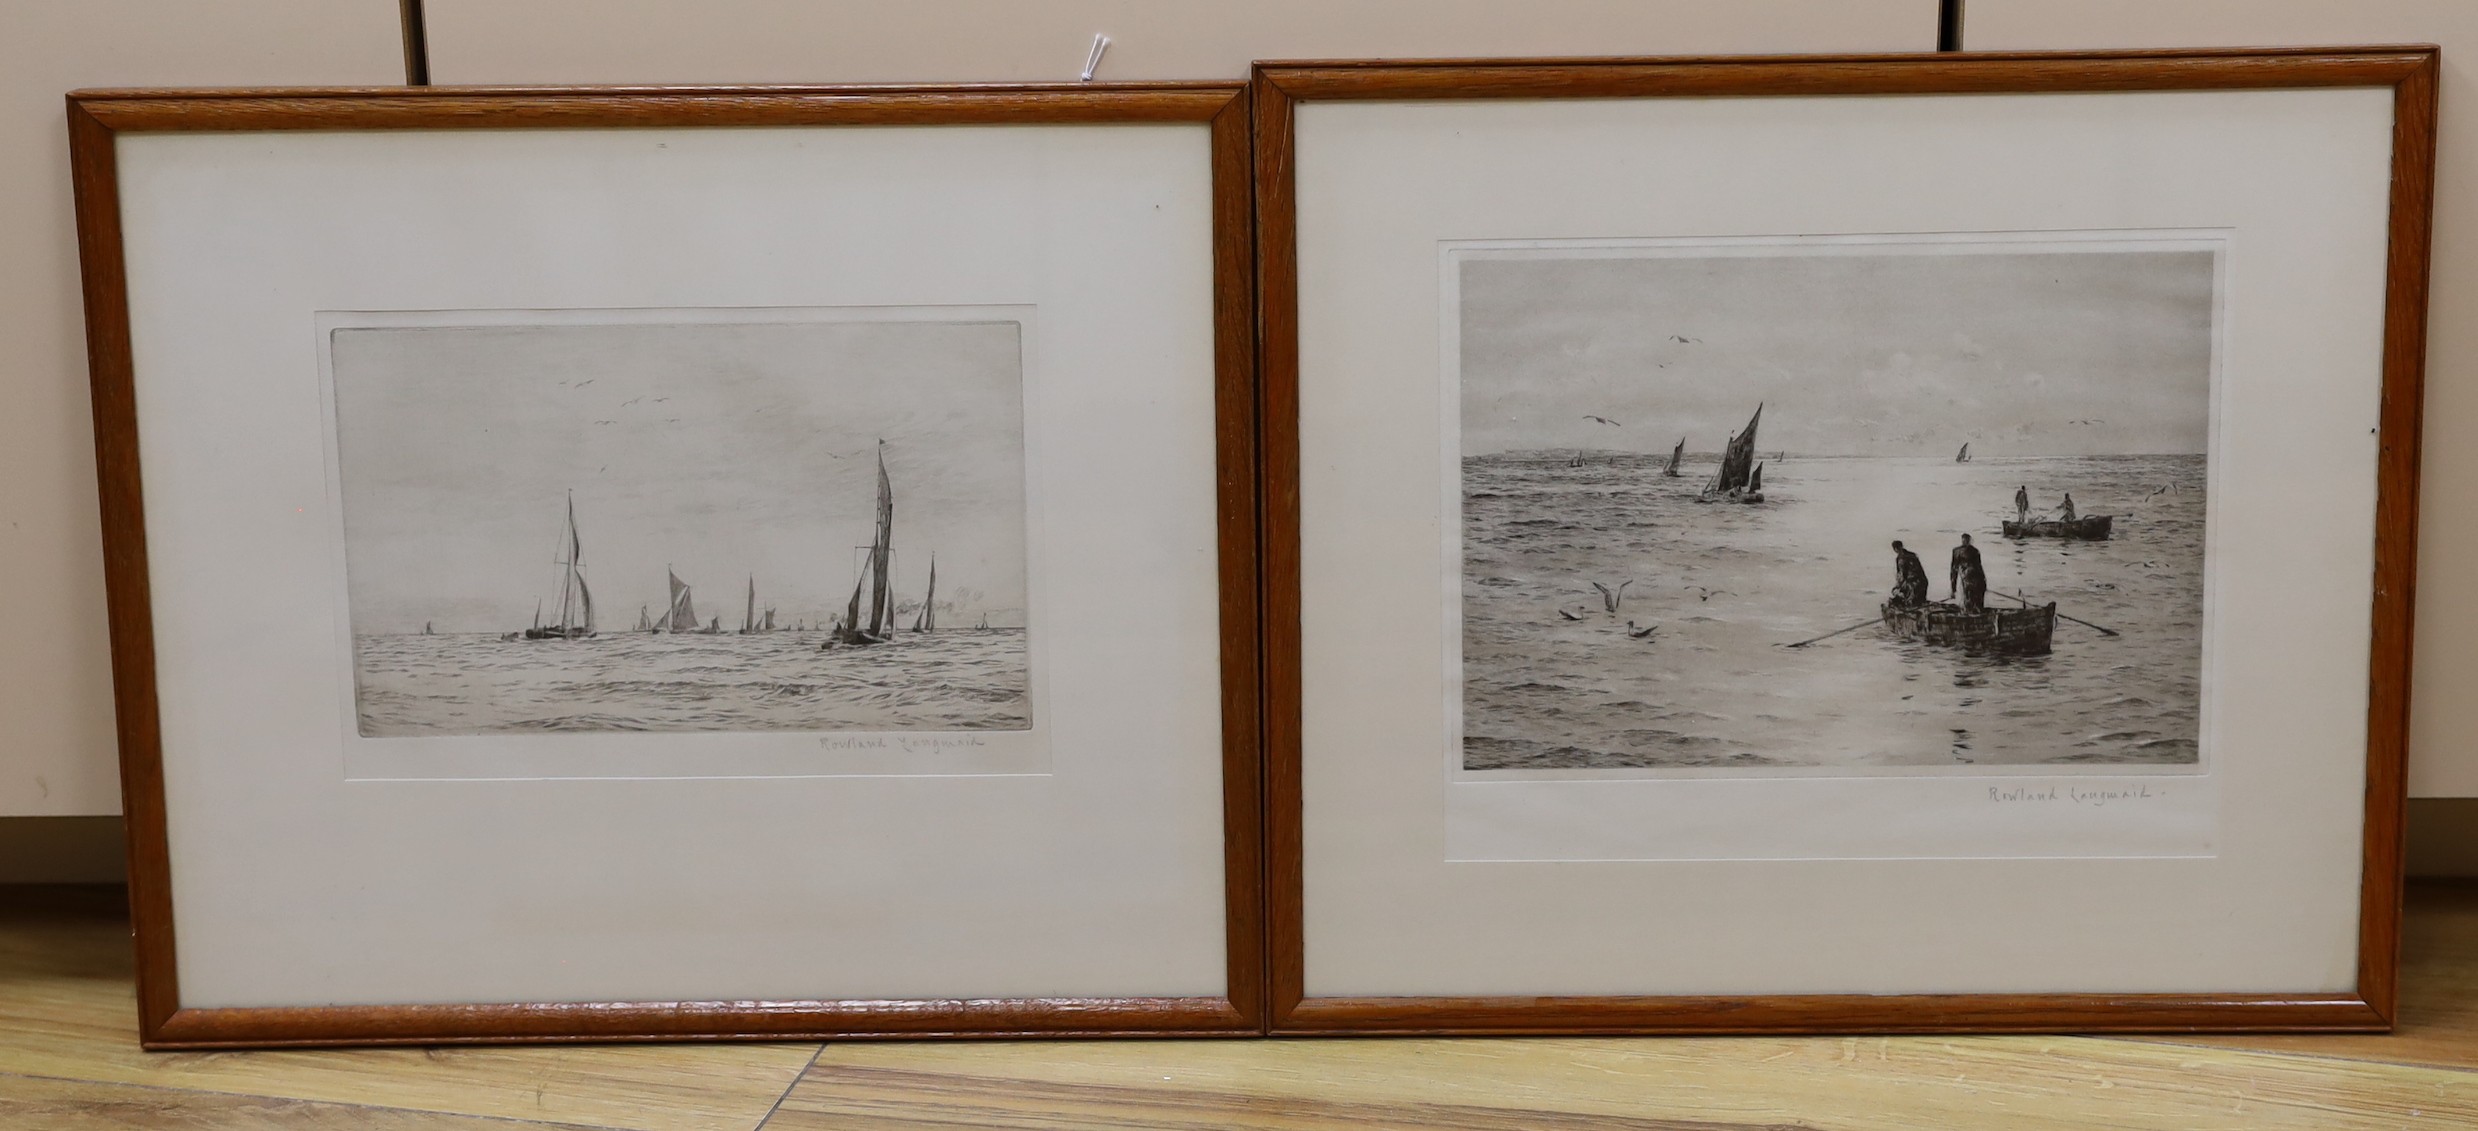 Rowland Langmaid (1897-1956), two etchings, Fishing boats at sea, signed in pencil, 14 x 22cm and 18 x 24cm